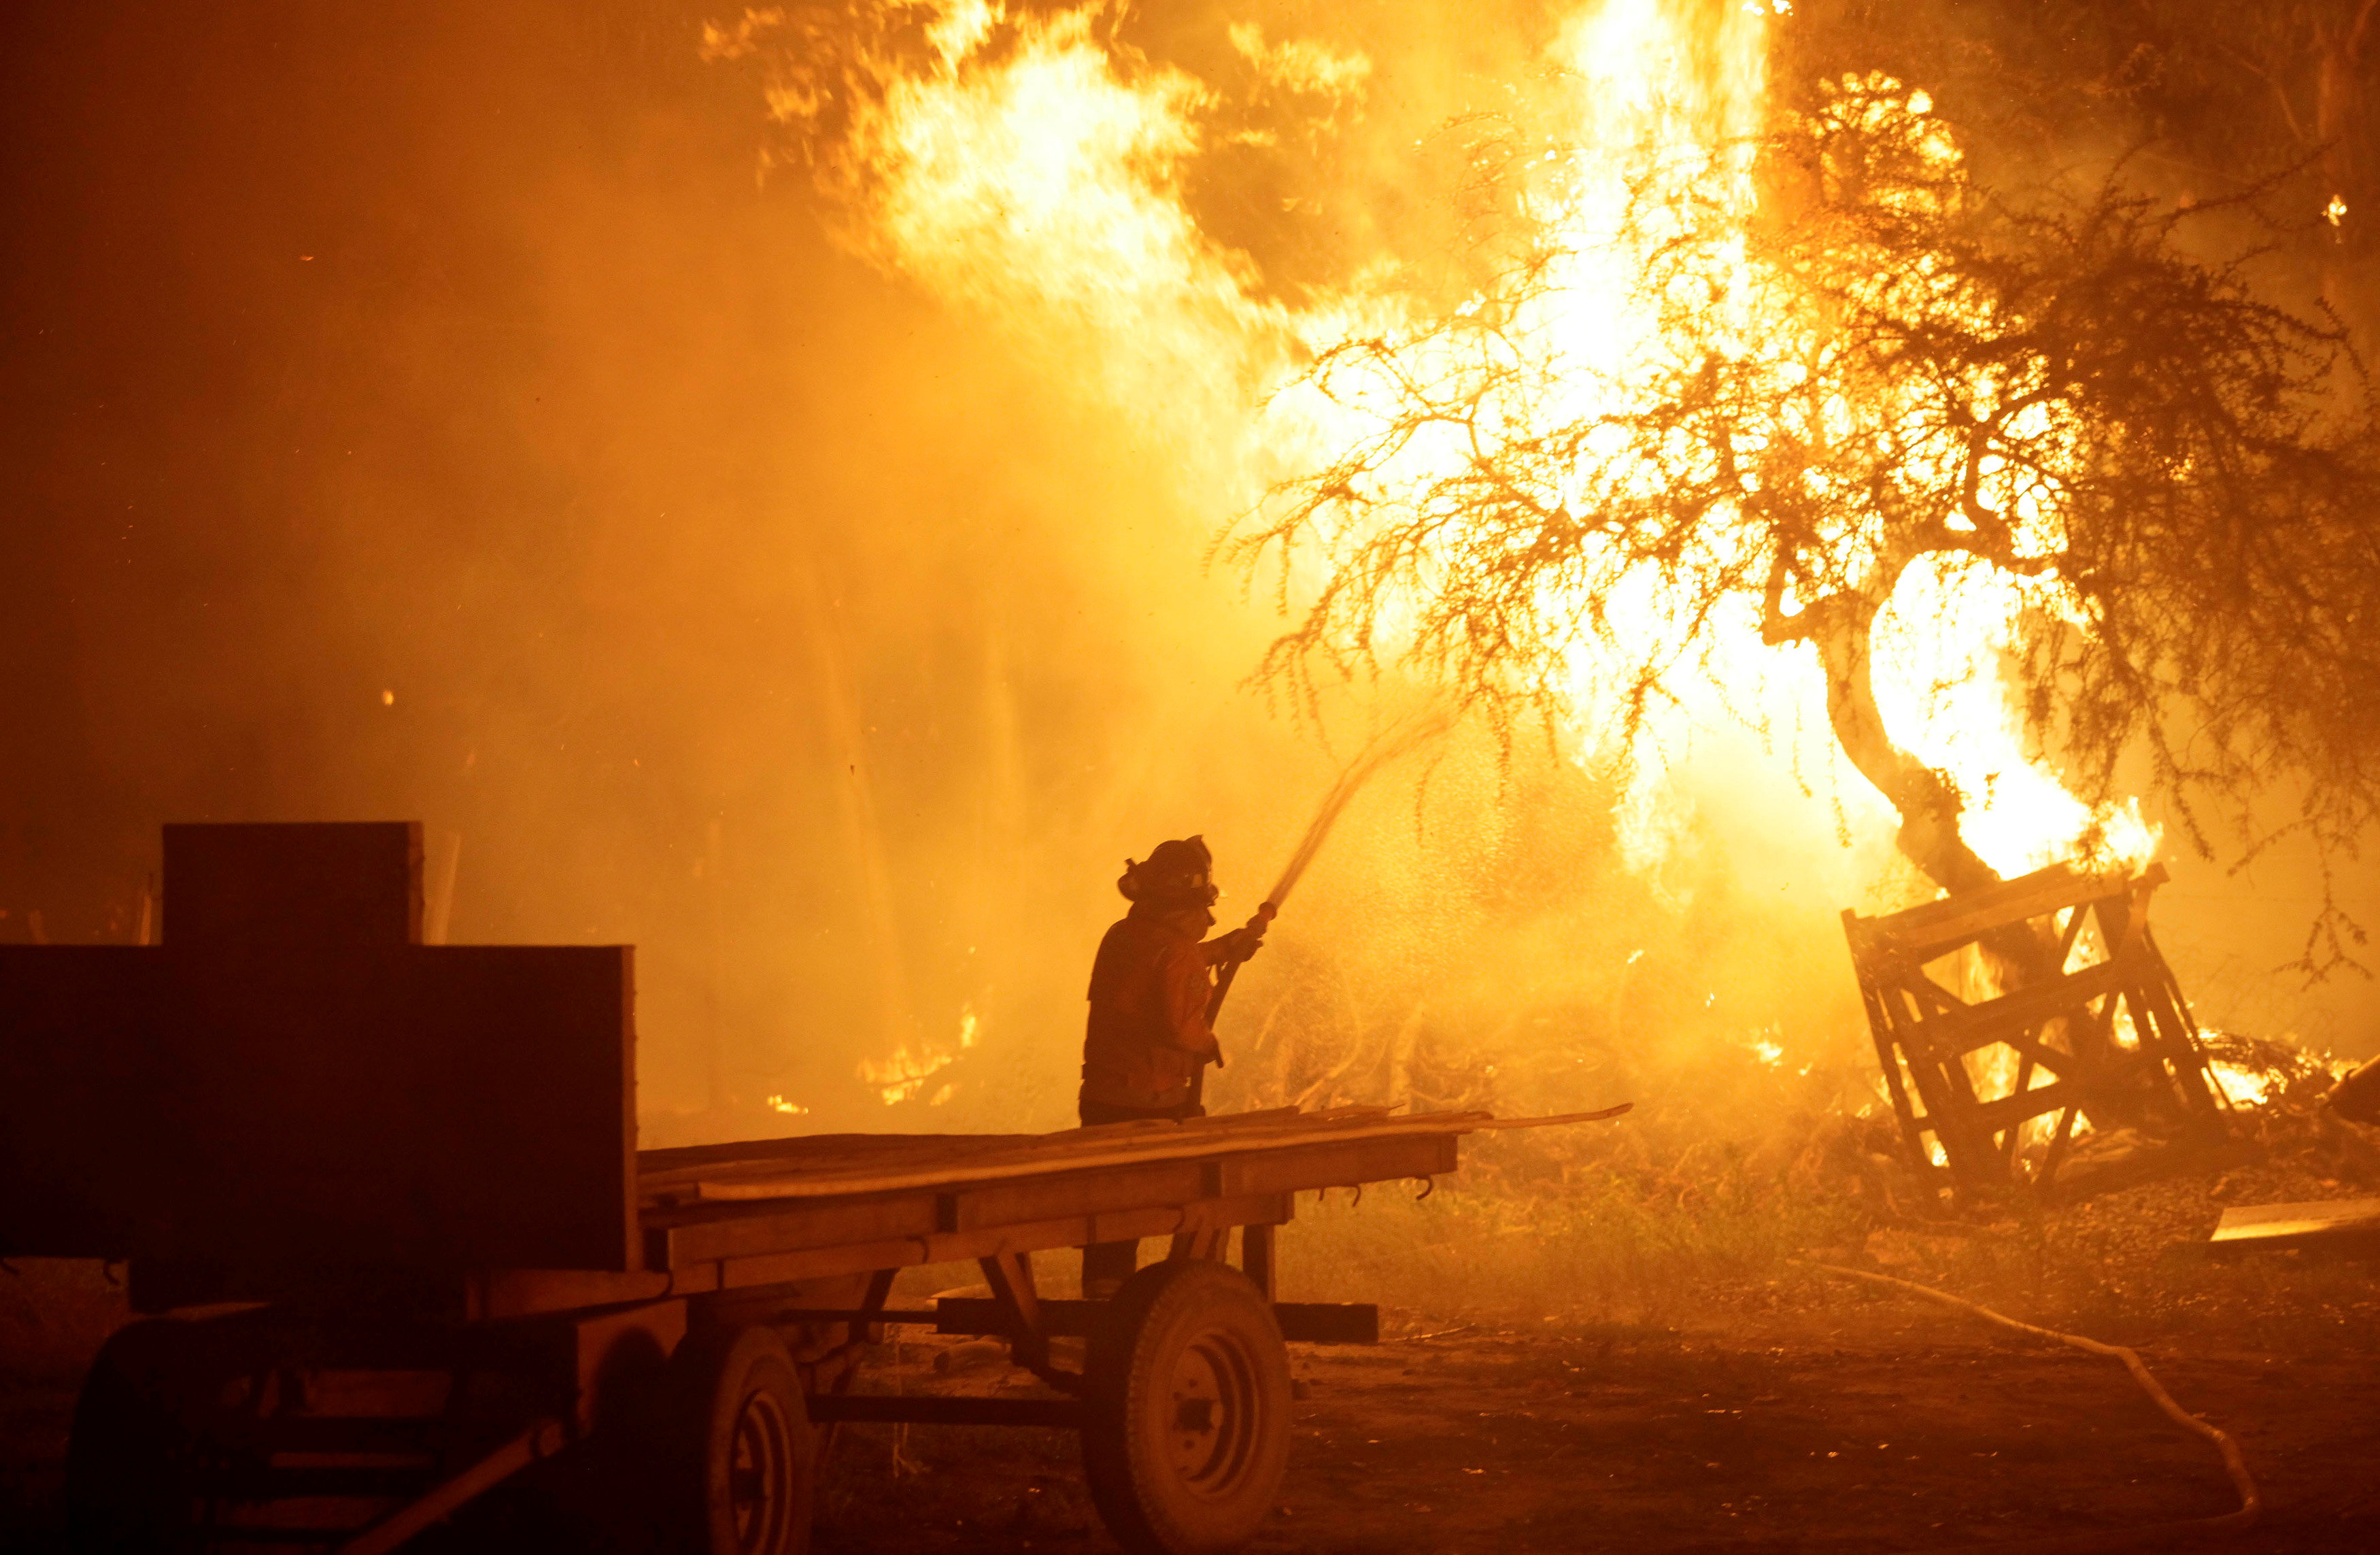 A firefighter tries to stop wildfires in Chile's central-south regions, in Portezuelo - NARCH/NARCH30